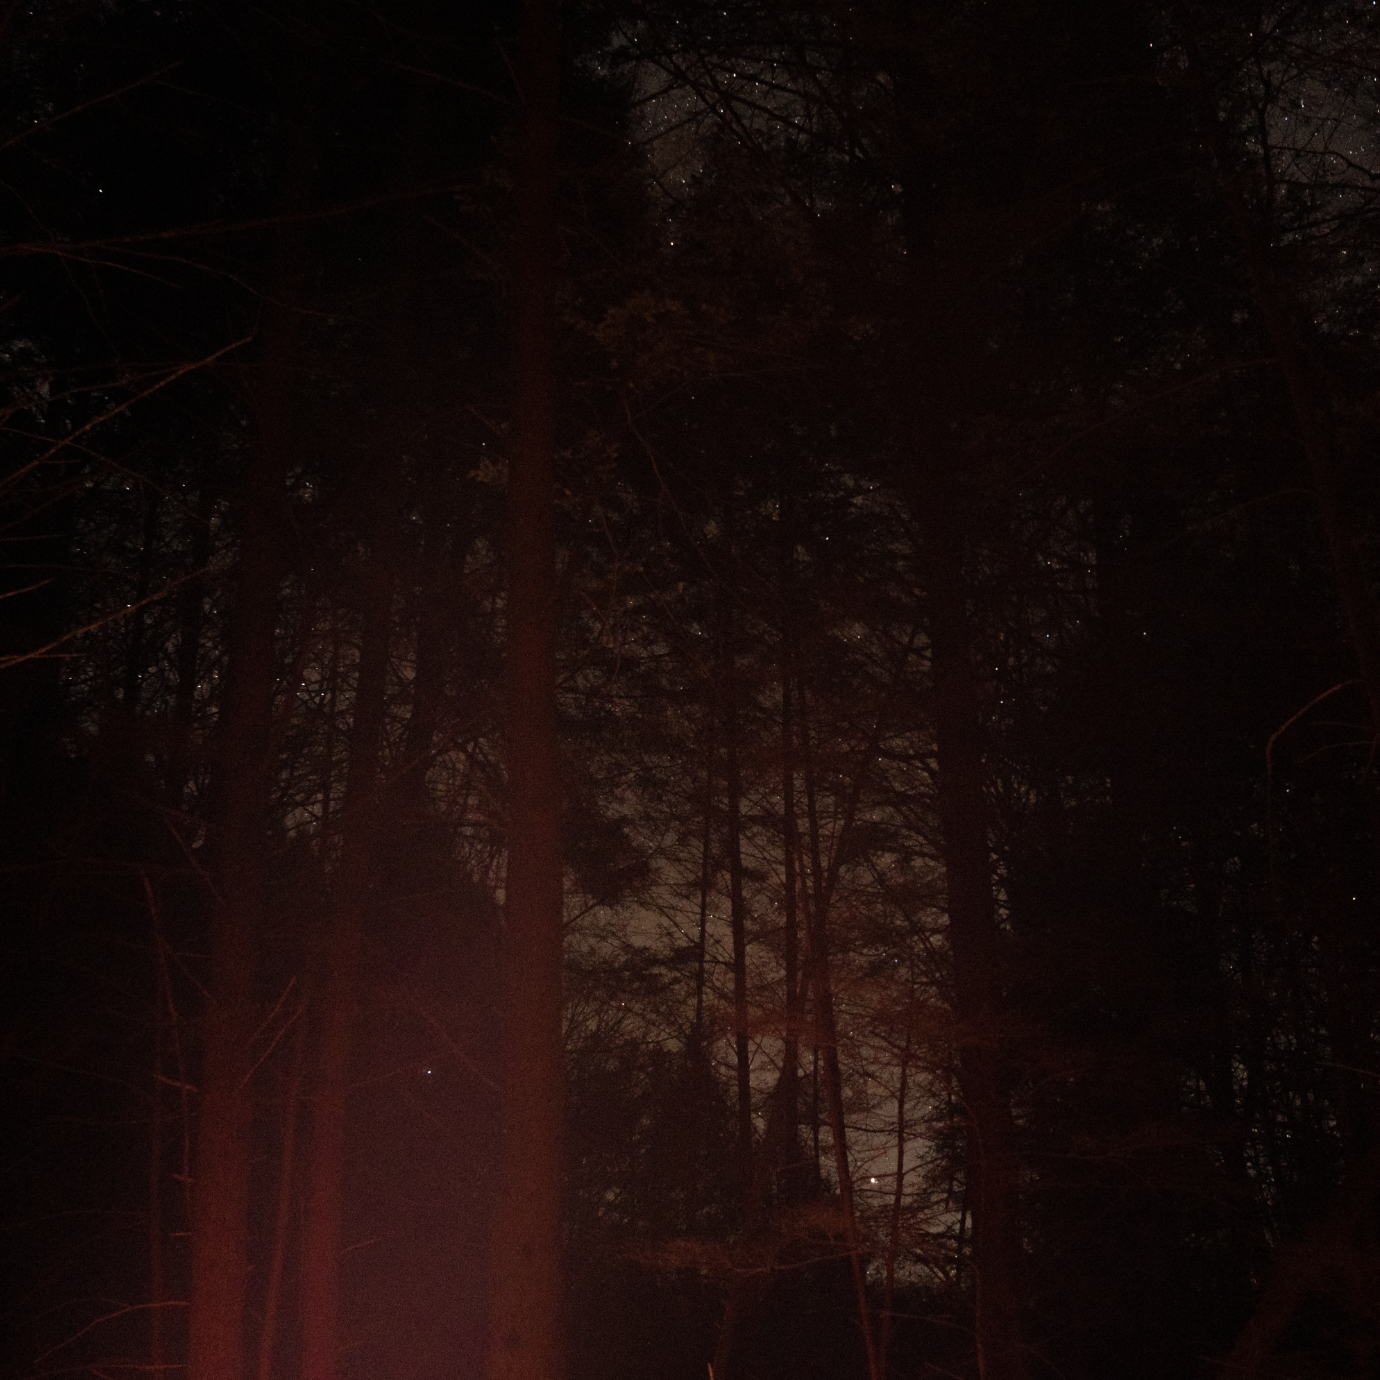 The faint glow of a fire illuminates the trees above with a starry night barely visible in the background